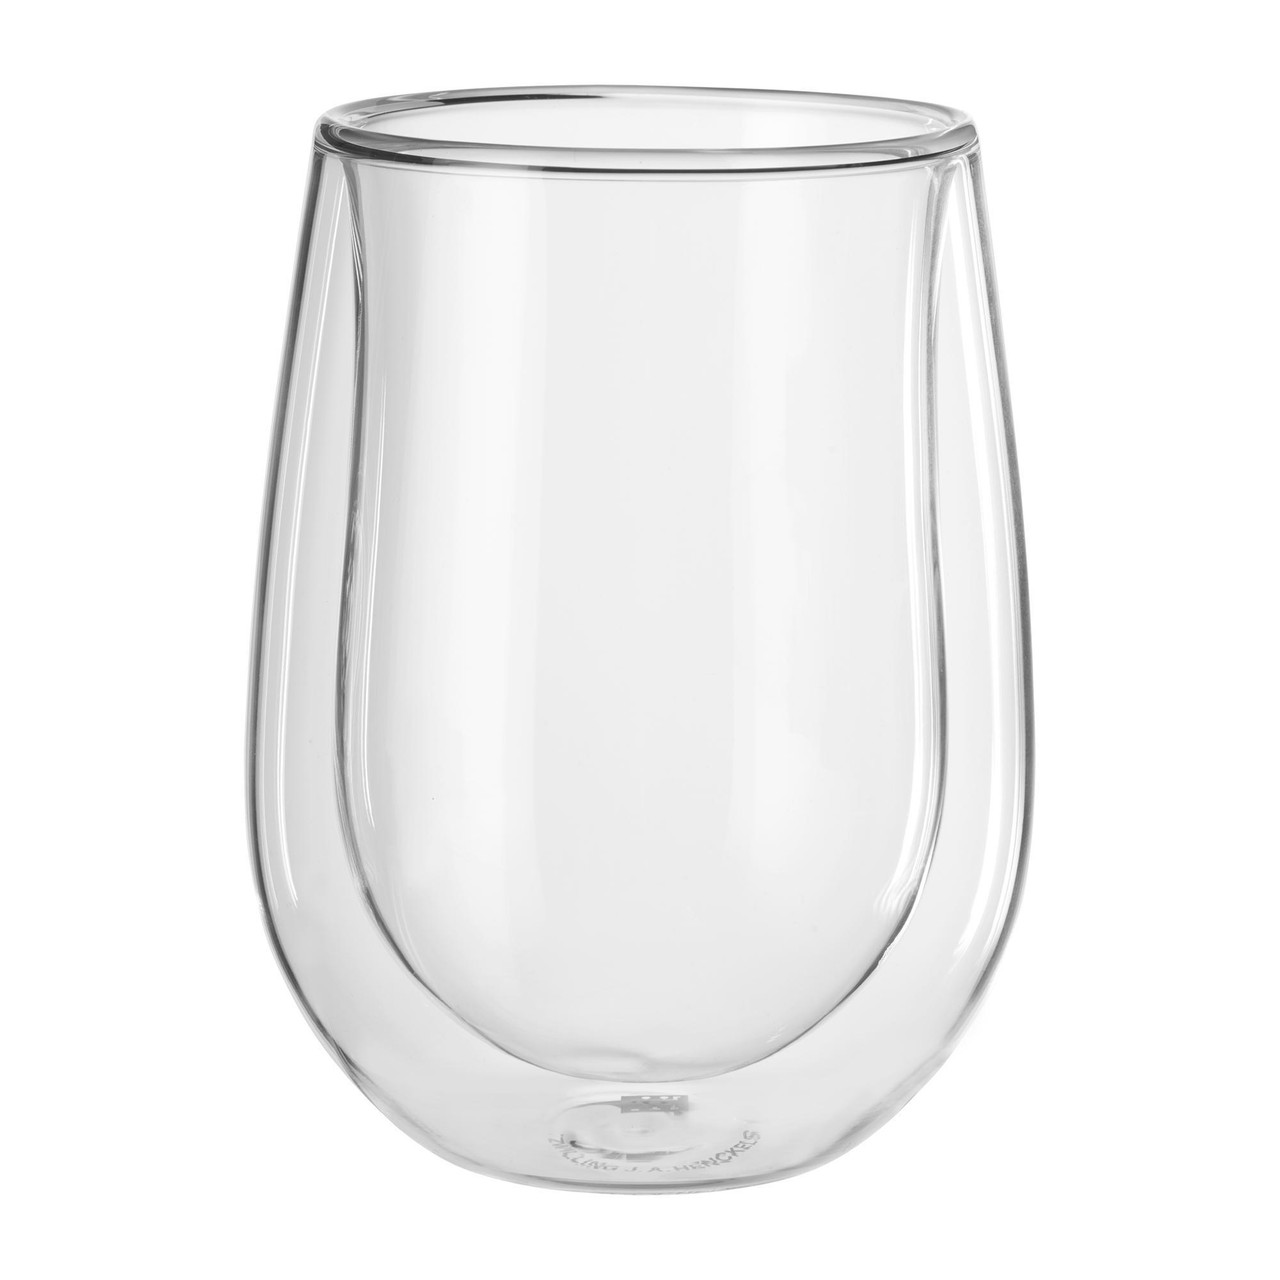 ZWILLING SORRENTO BAR DOUBLE WALL GLASS SOMMELIER SET